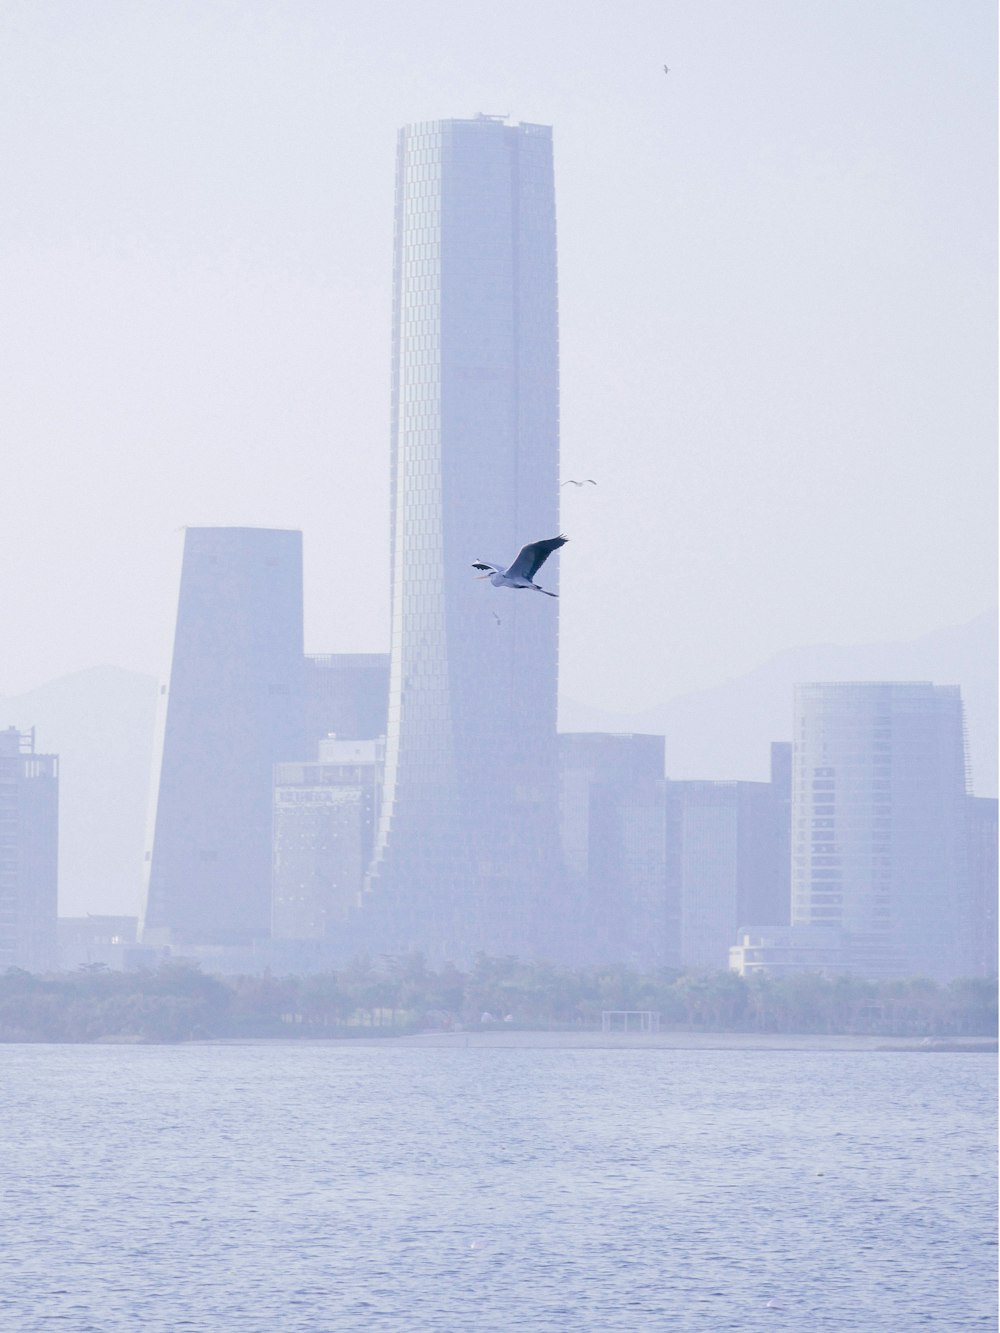 bird flying over the city during daytime